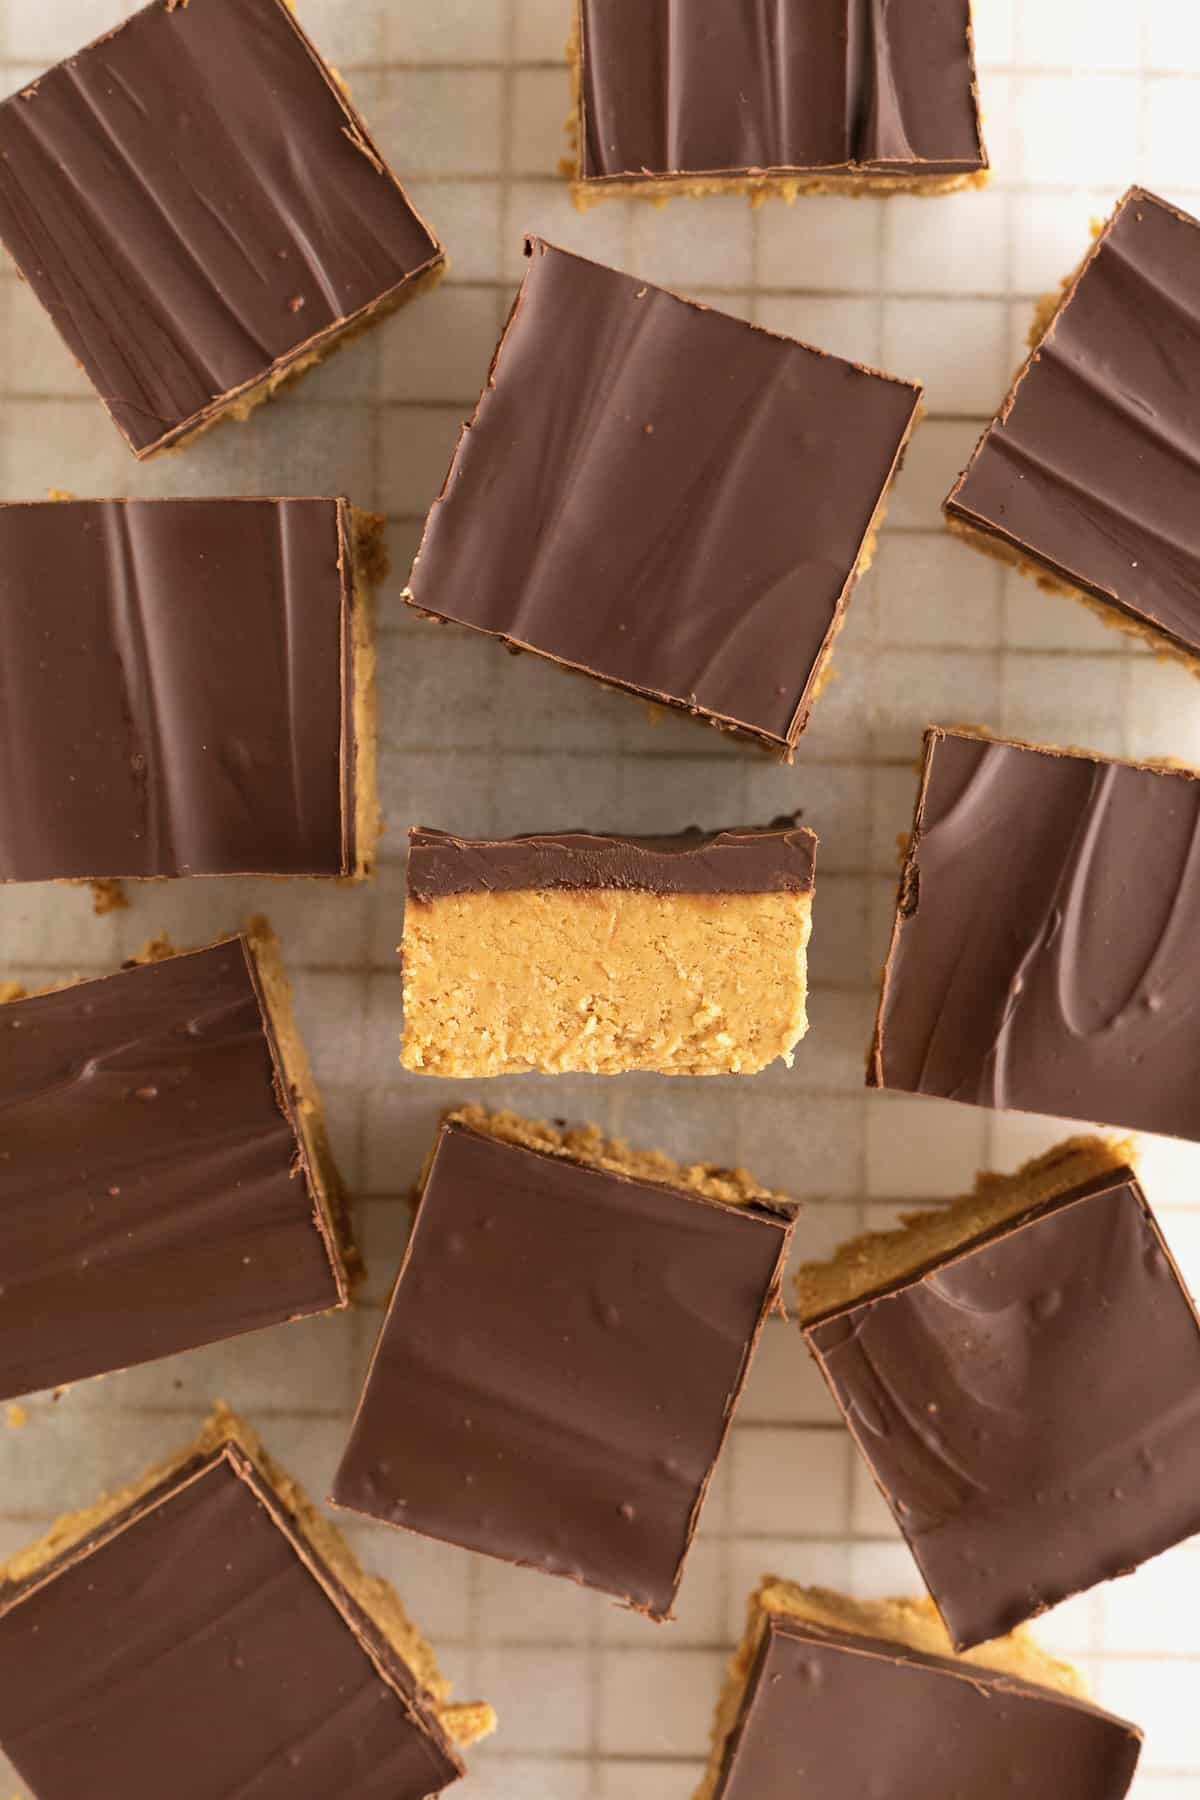 Chocolate covered peanut butter bars cut into squares  scattered on a parchment lined cooling rack. One square is turned on its side revealing the two layers.